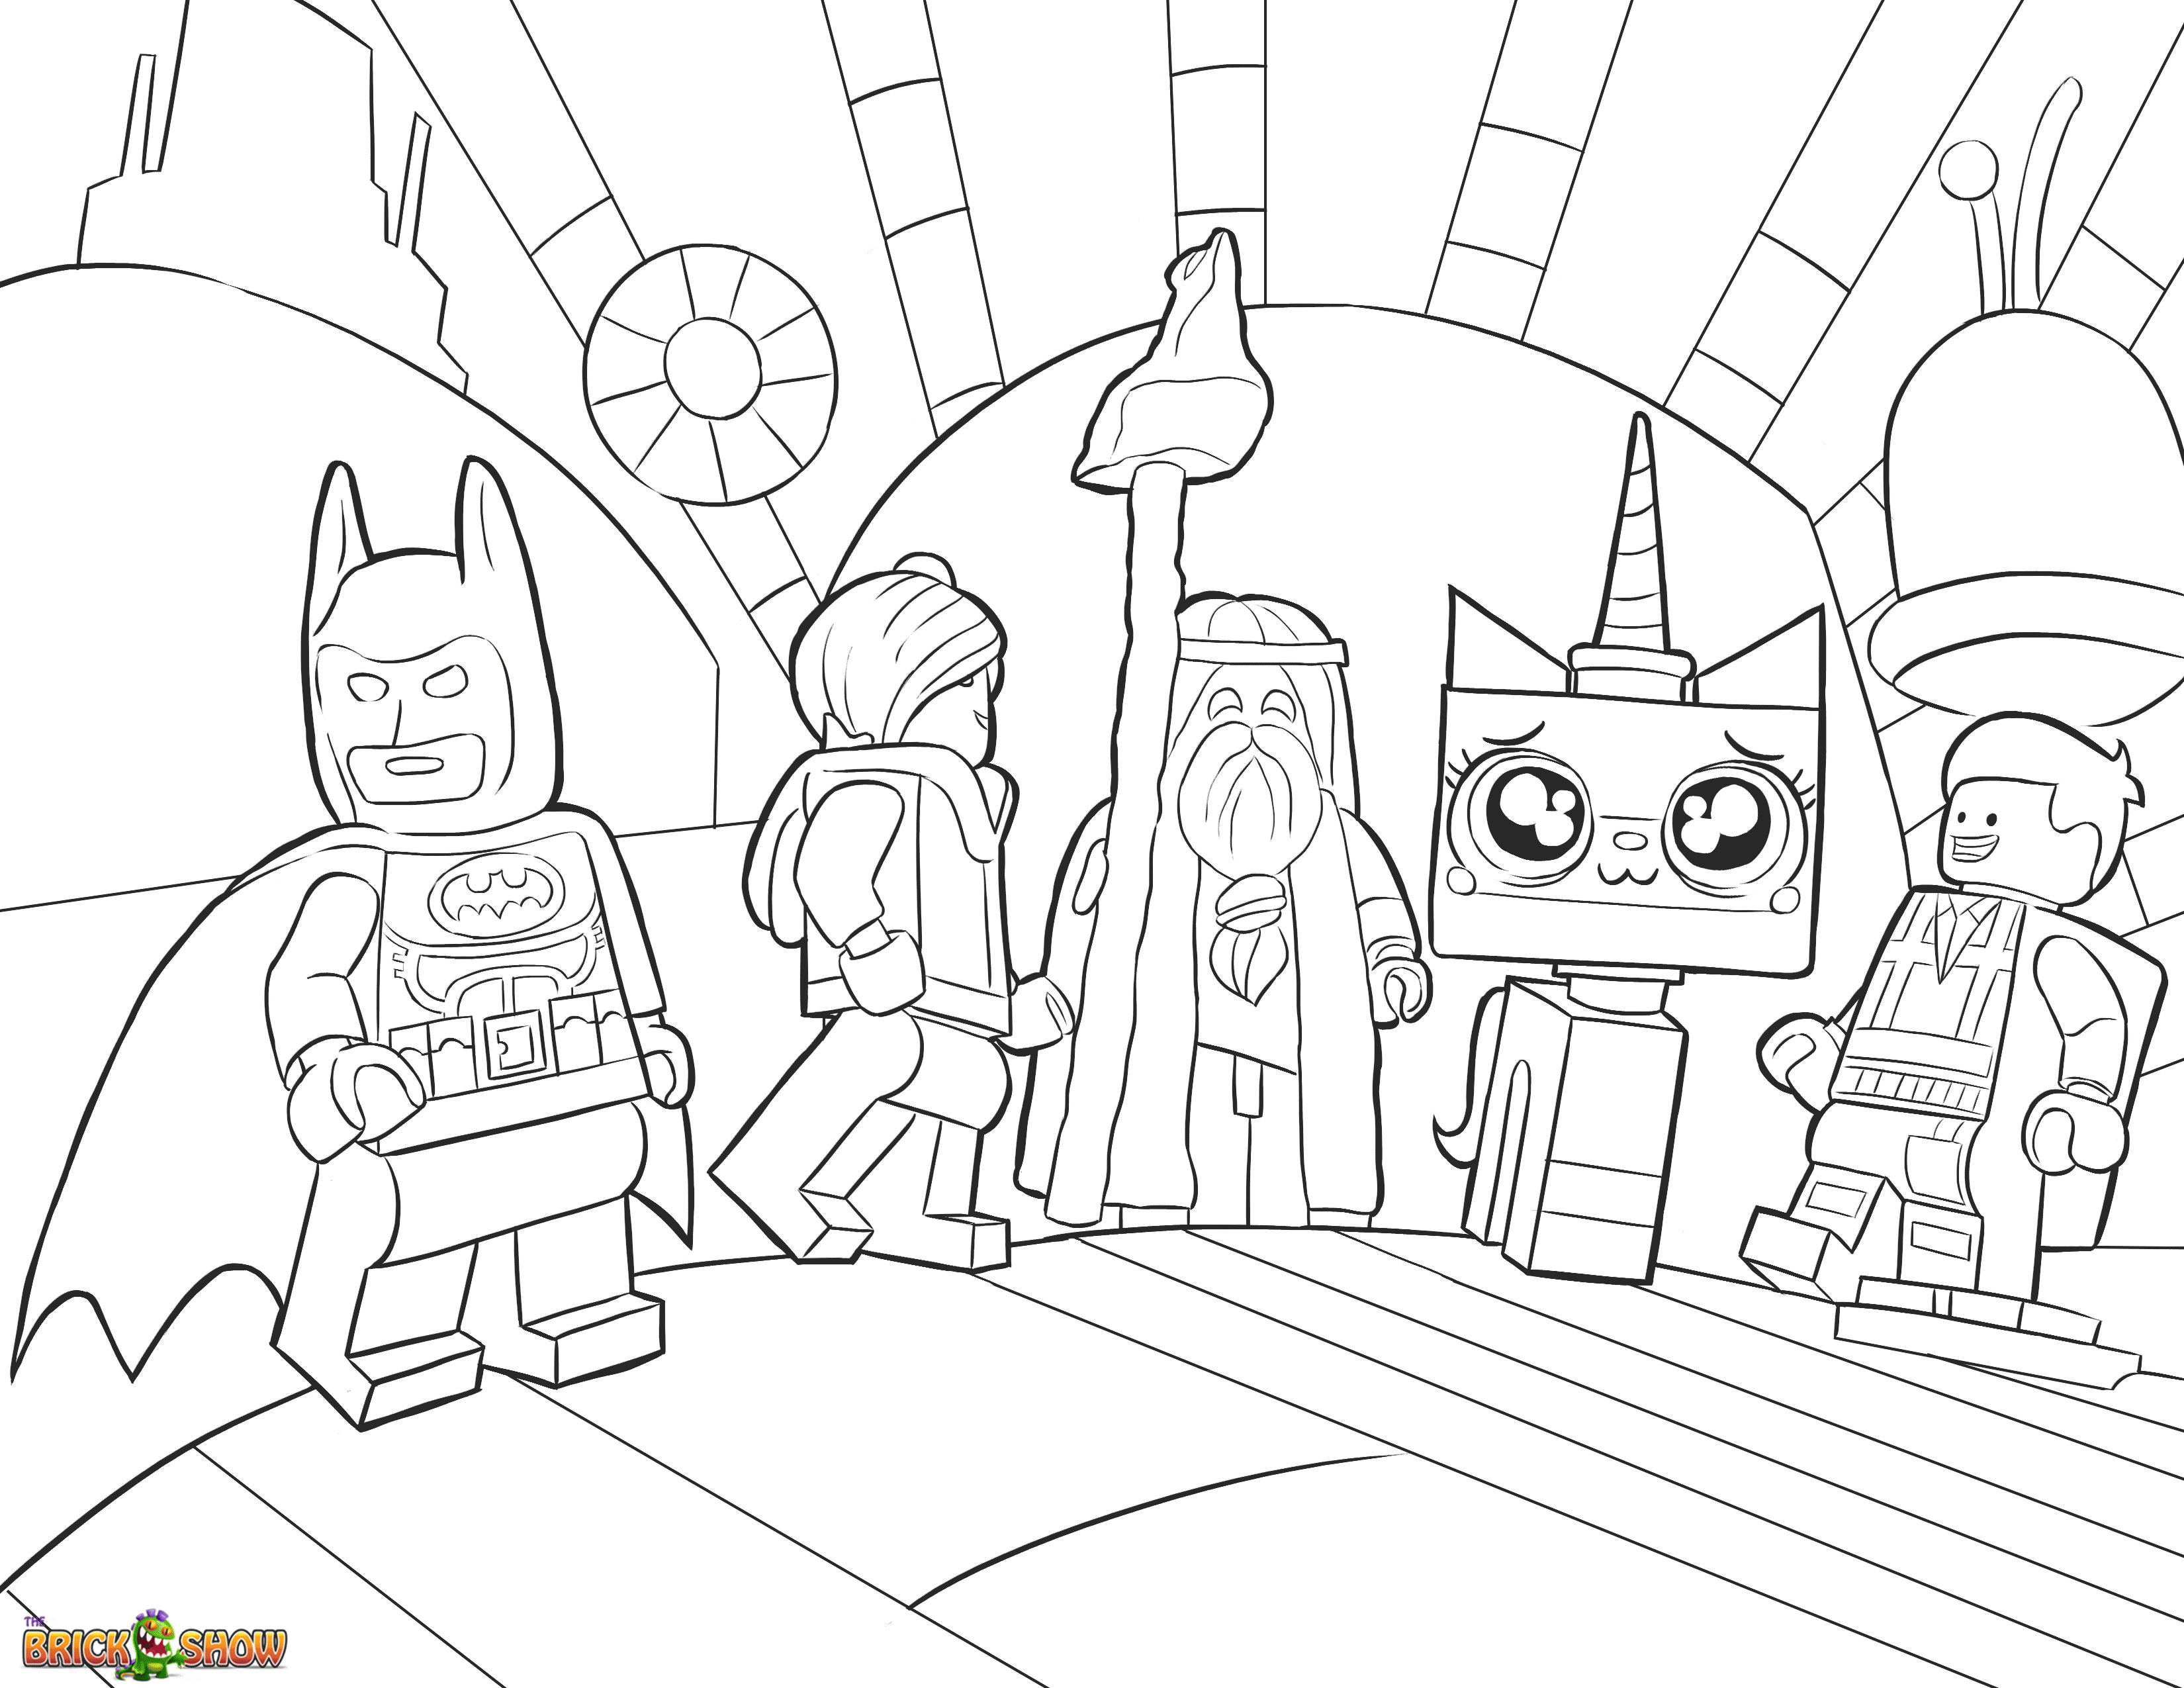 Legos Coloring Pages Free Printable - Coloring Home